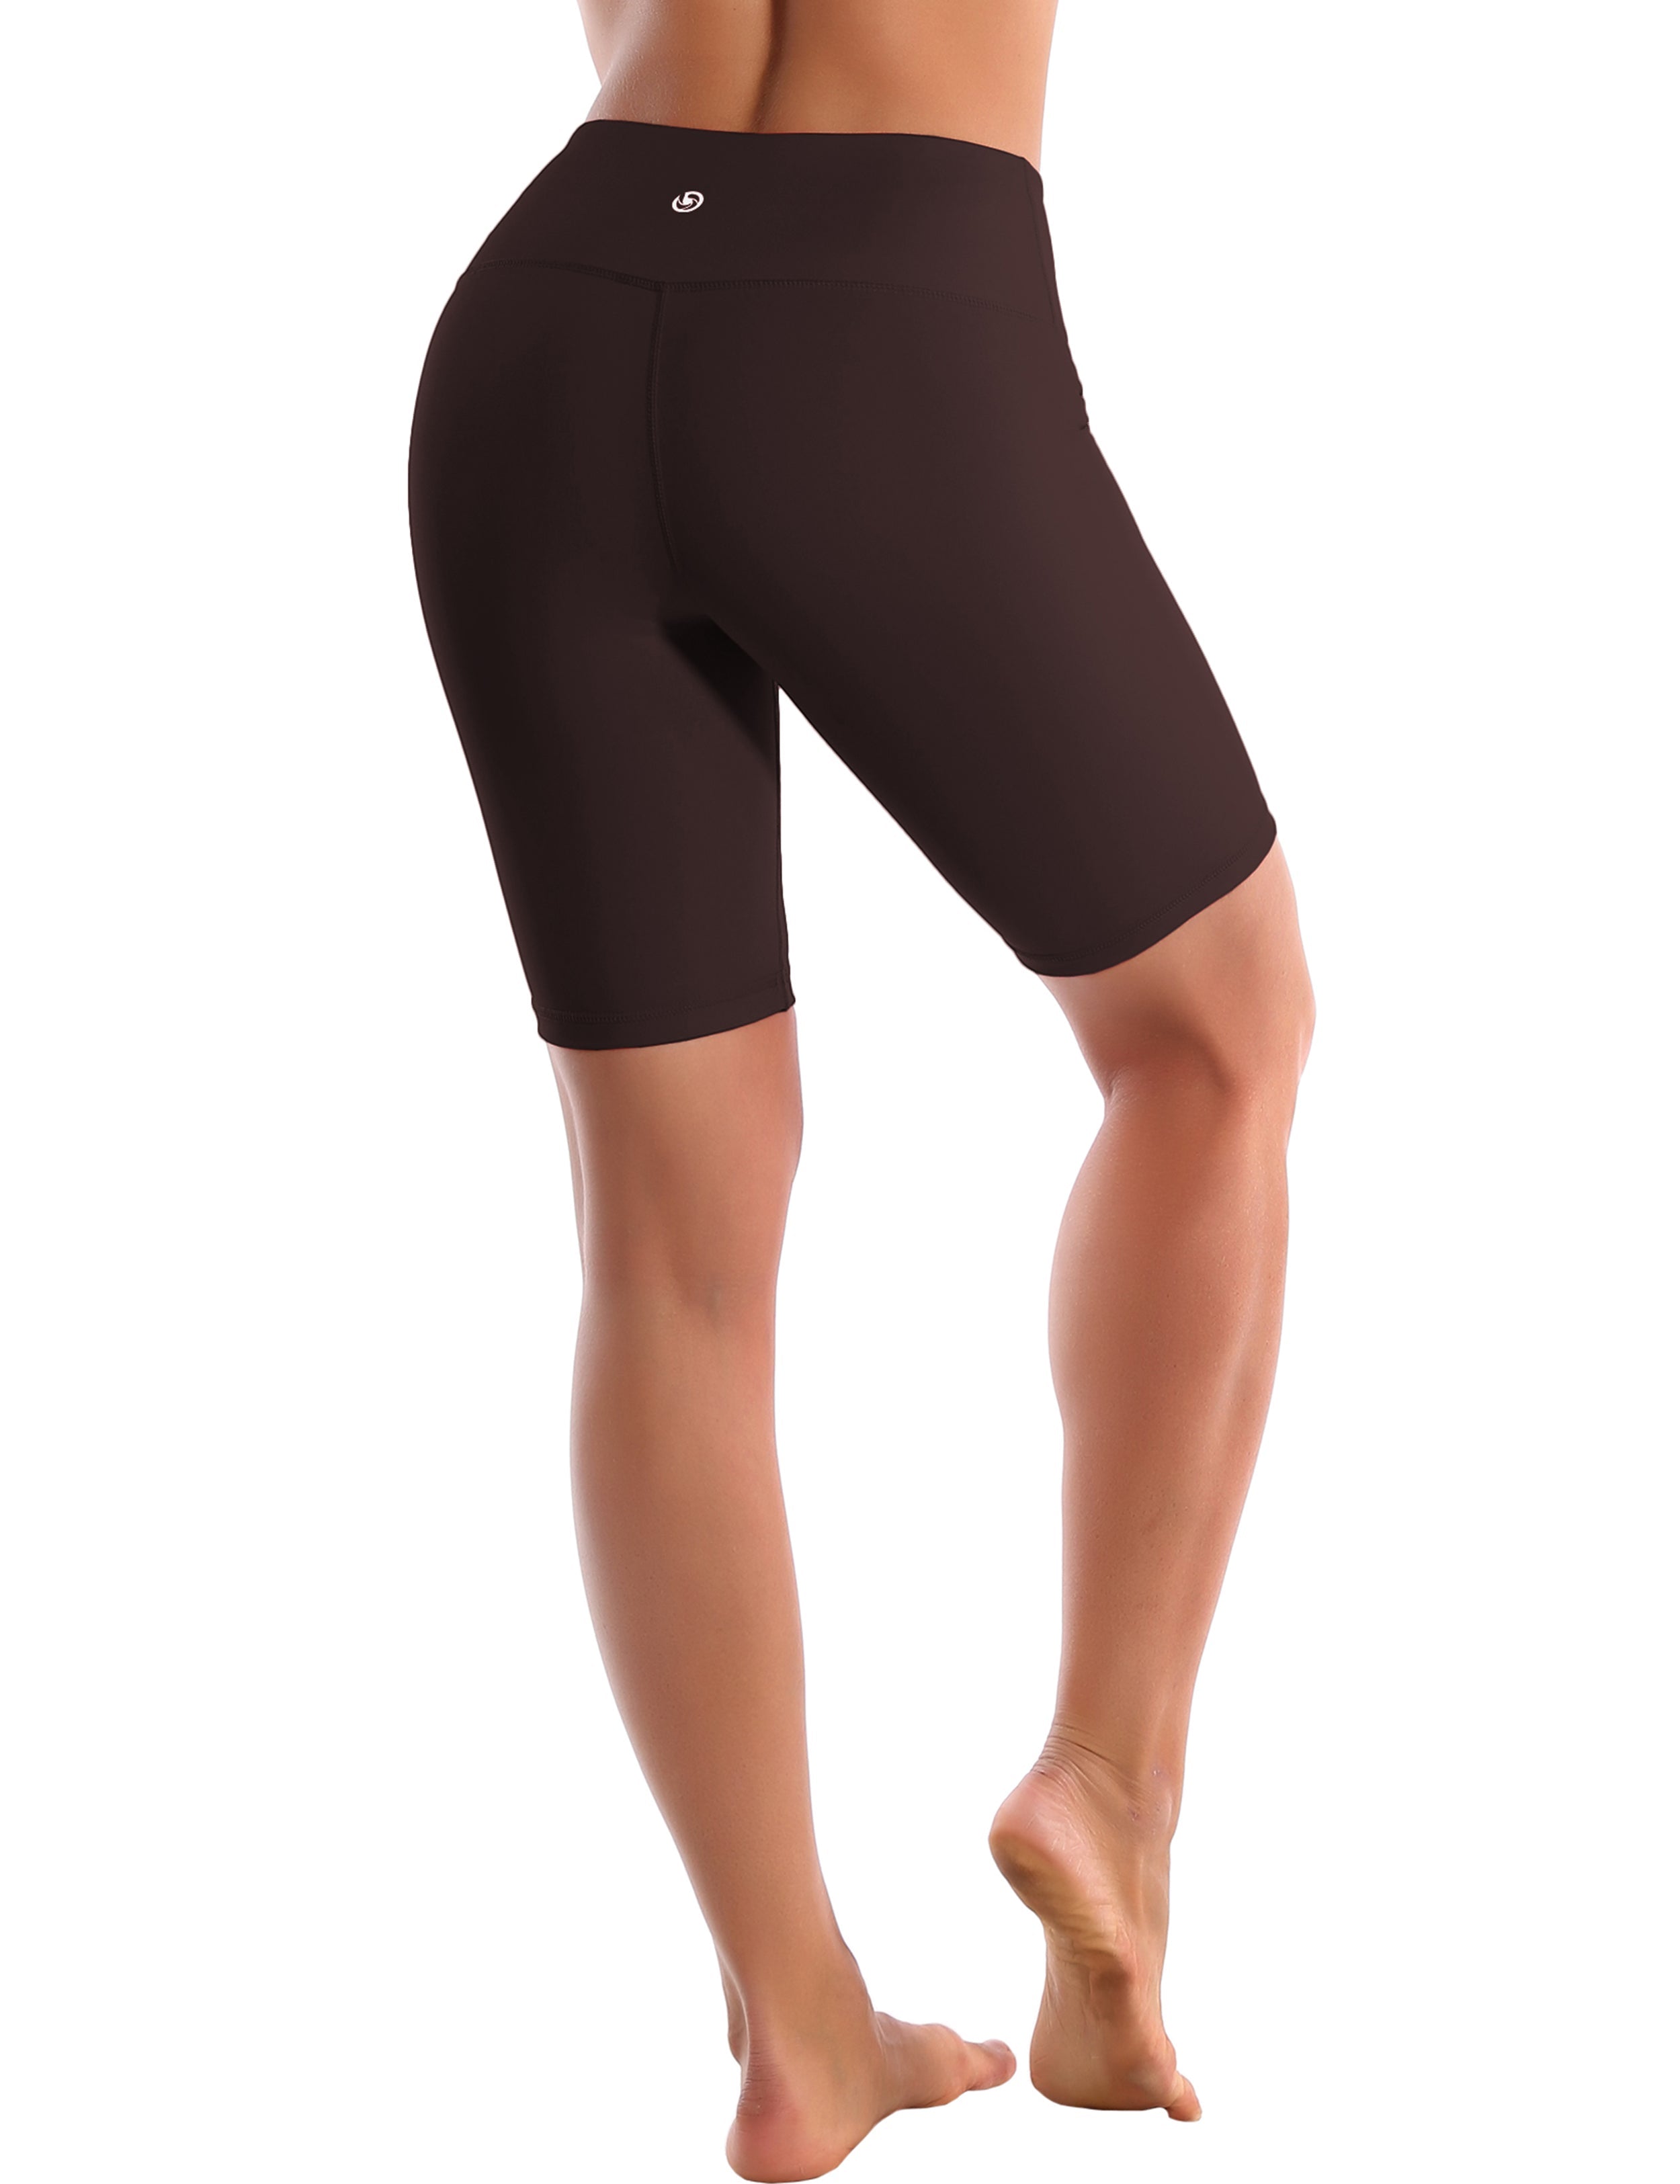 8" High Waist yogastudio Shorts mahoganymaroon Sleek, soft, smooth and totally comfortable: our newest style is here. Softest-ever fabric High elasticity High density 4-way stretch Fabric doesn't attract lint easily No see-through Moisture-wicking Machine wash 75% Nylon, 25% Spandex